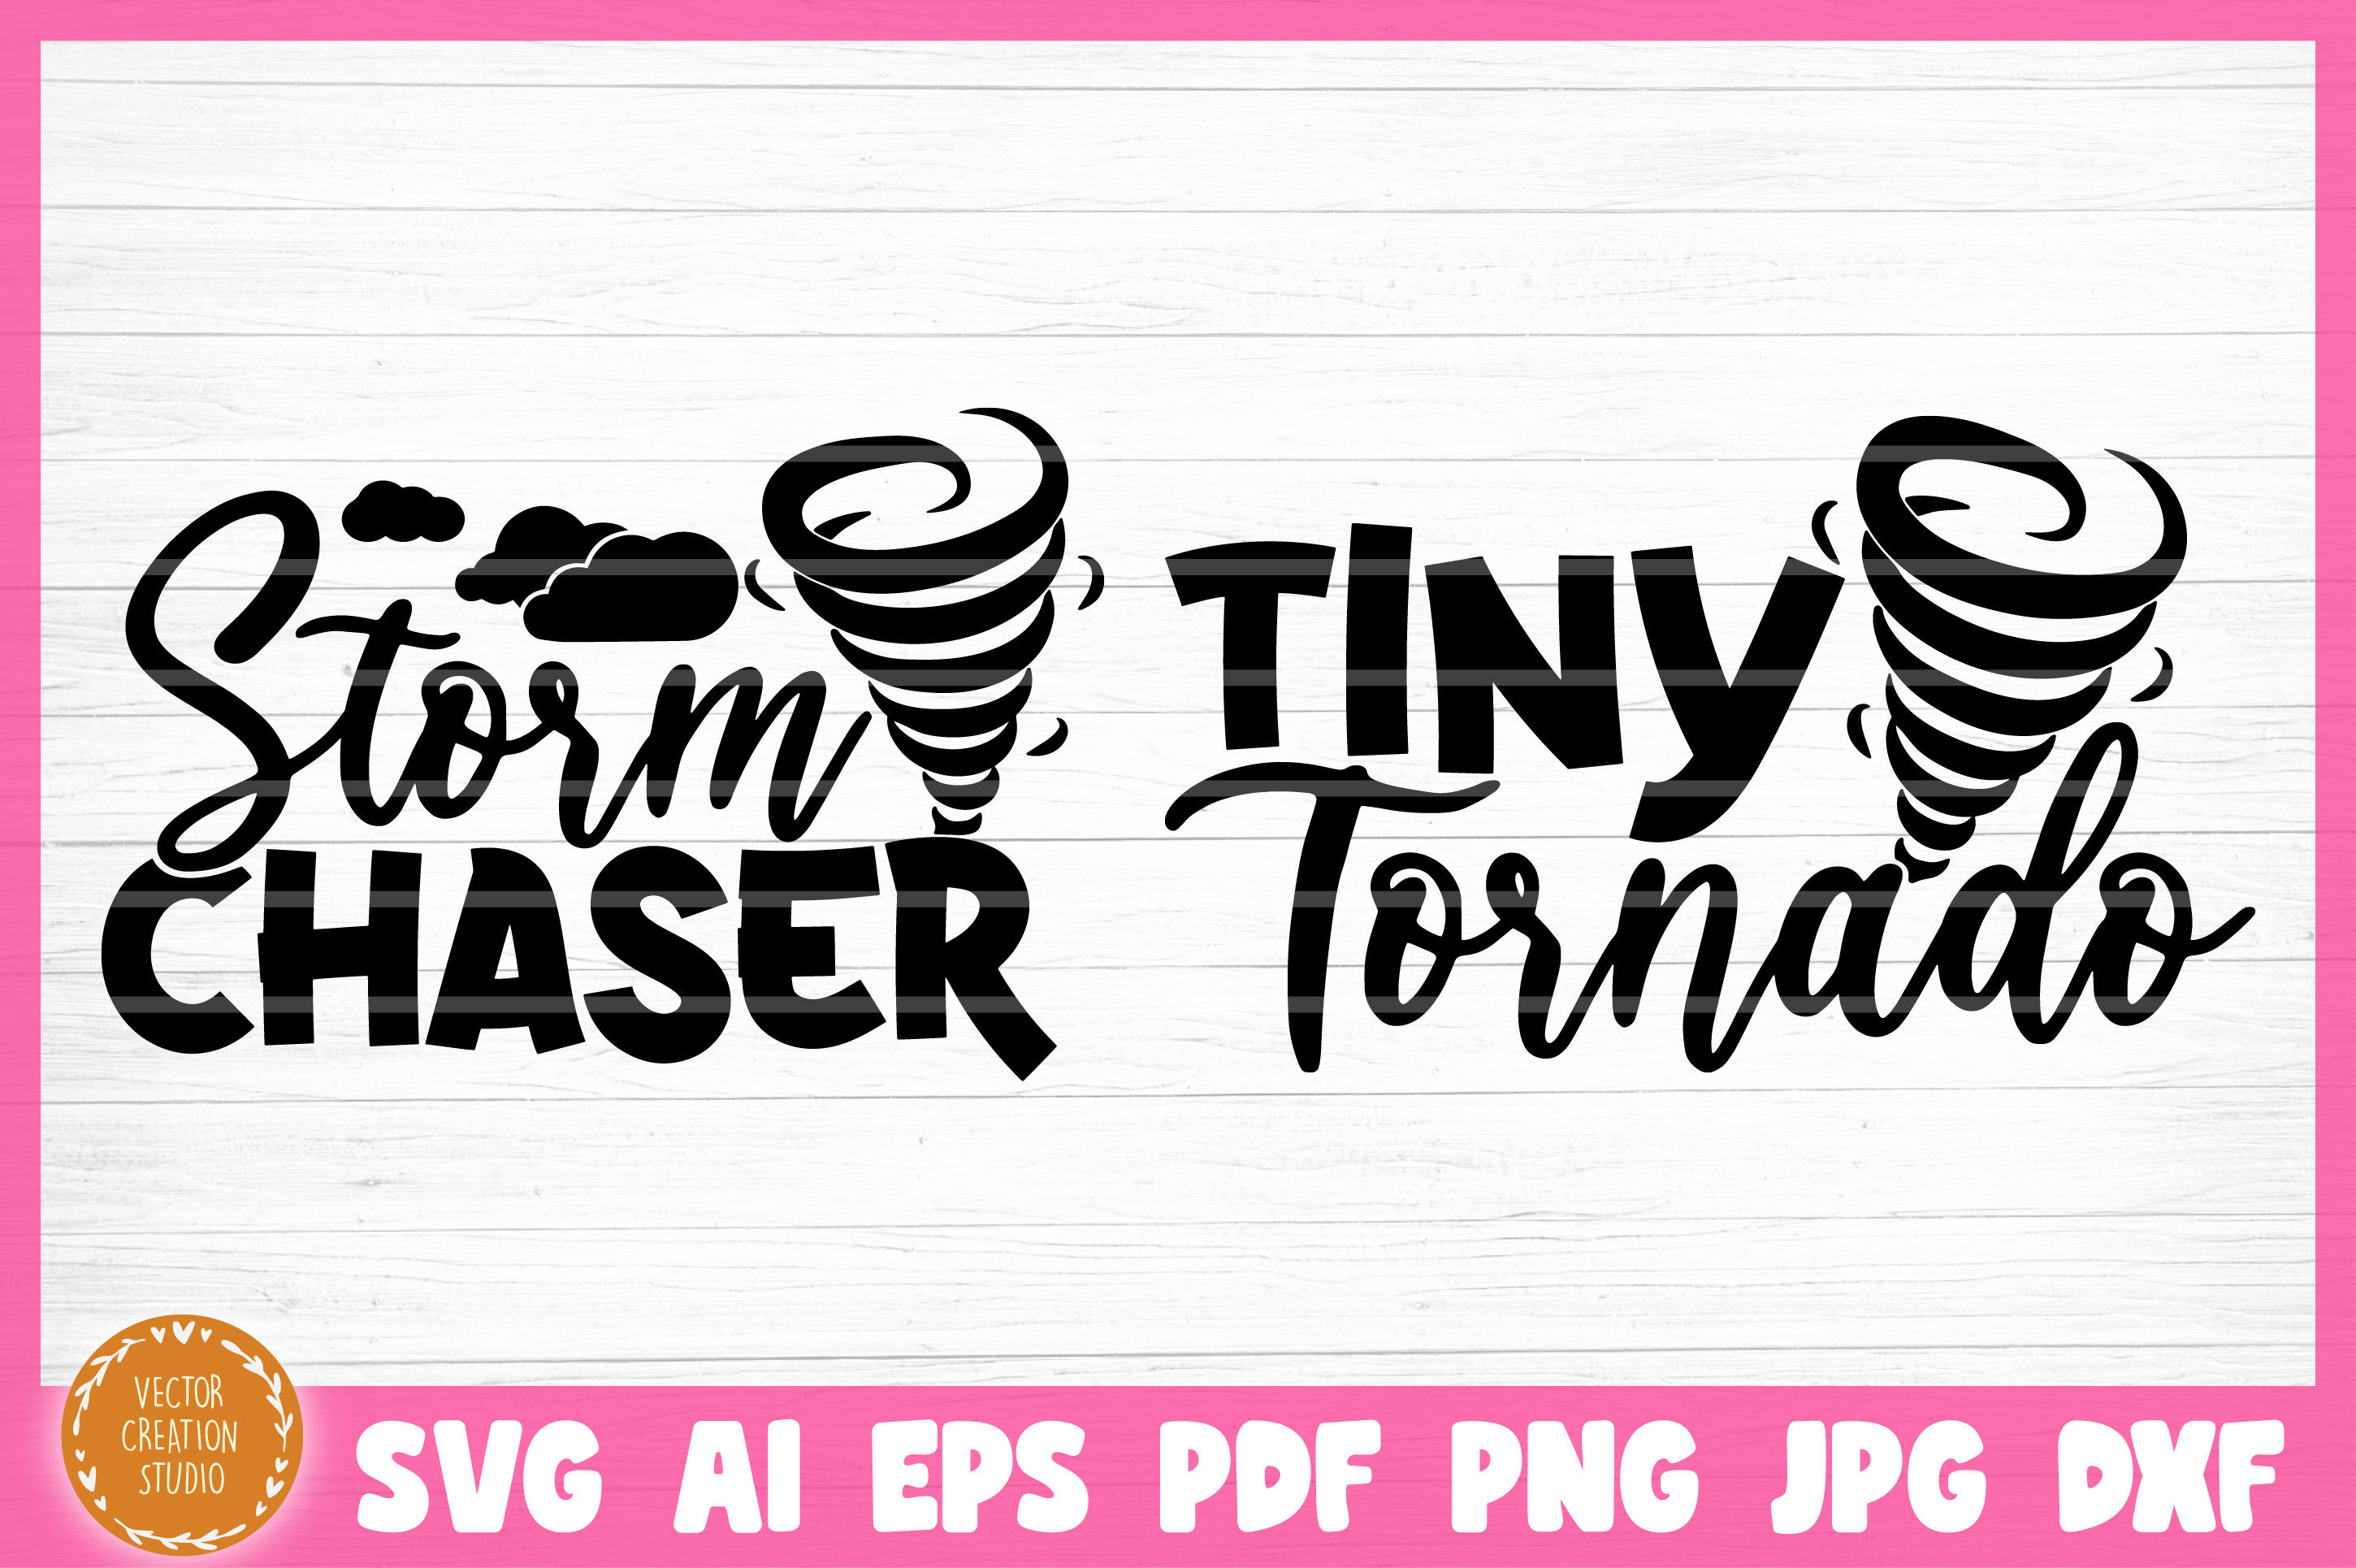 Download Storm Chaser Tiny Tornado Mother Daughter Svg Cut Files By Vectorcreationstudio Thehungryjpeg Com